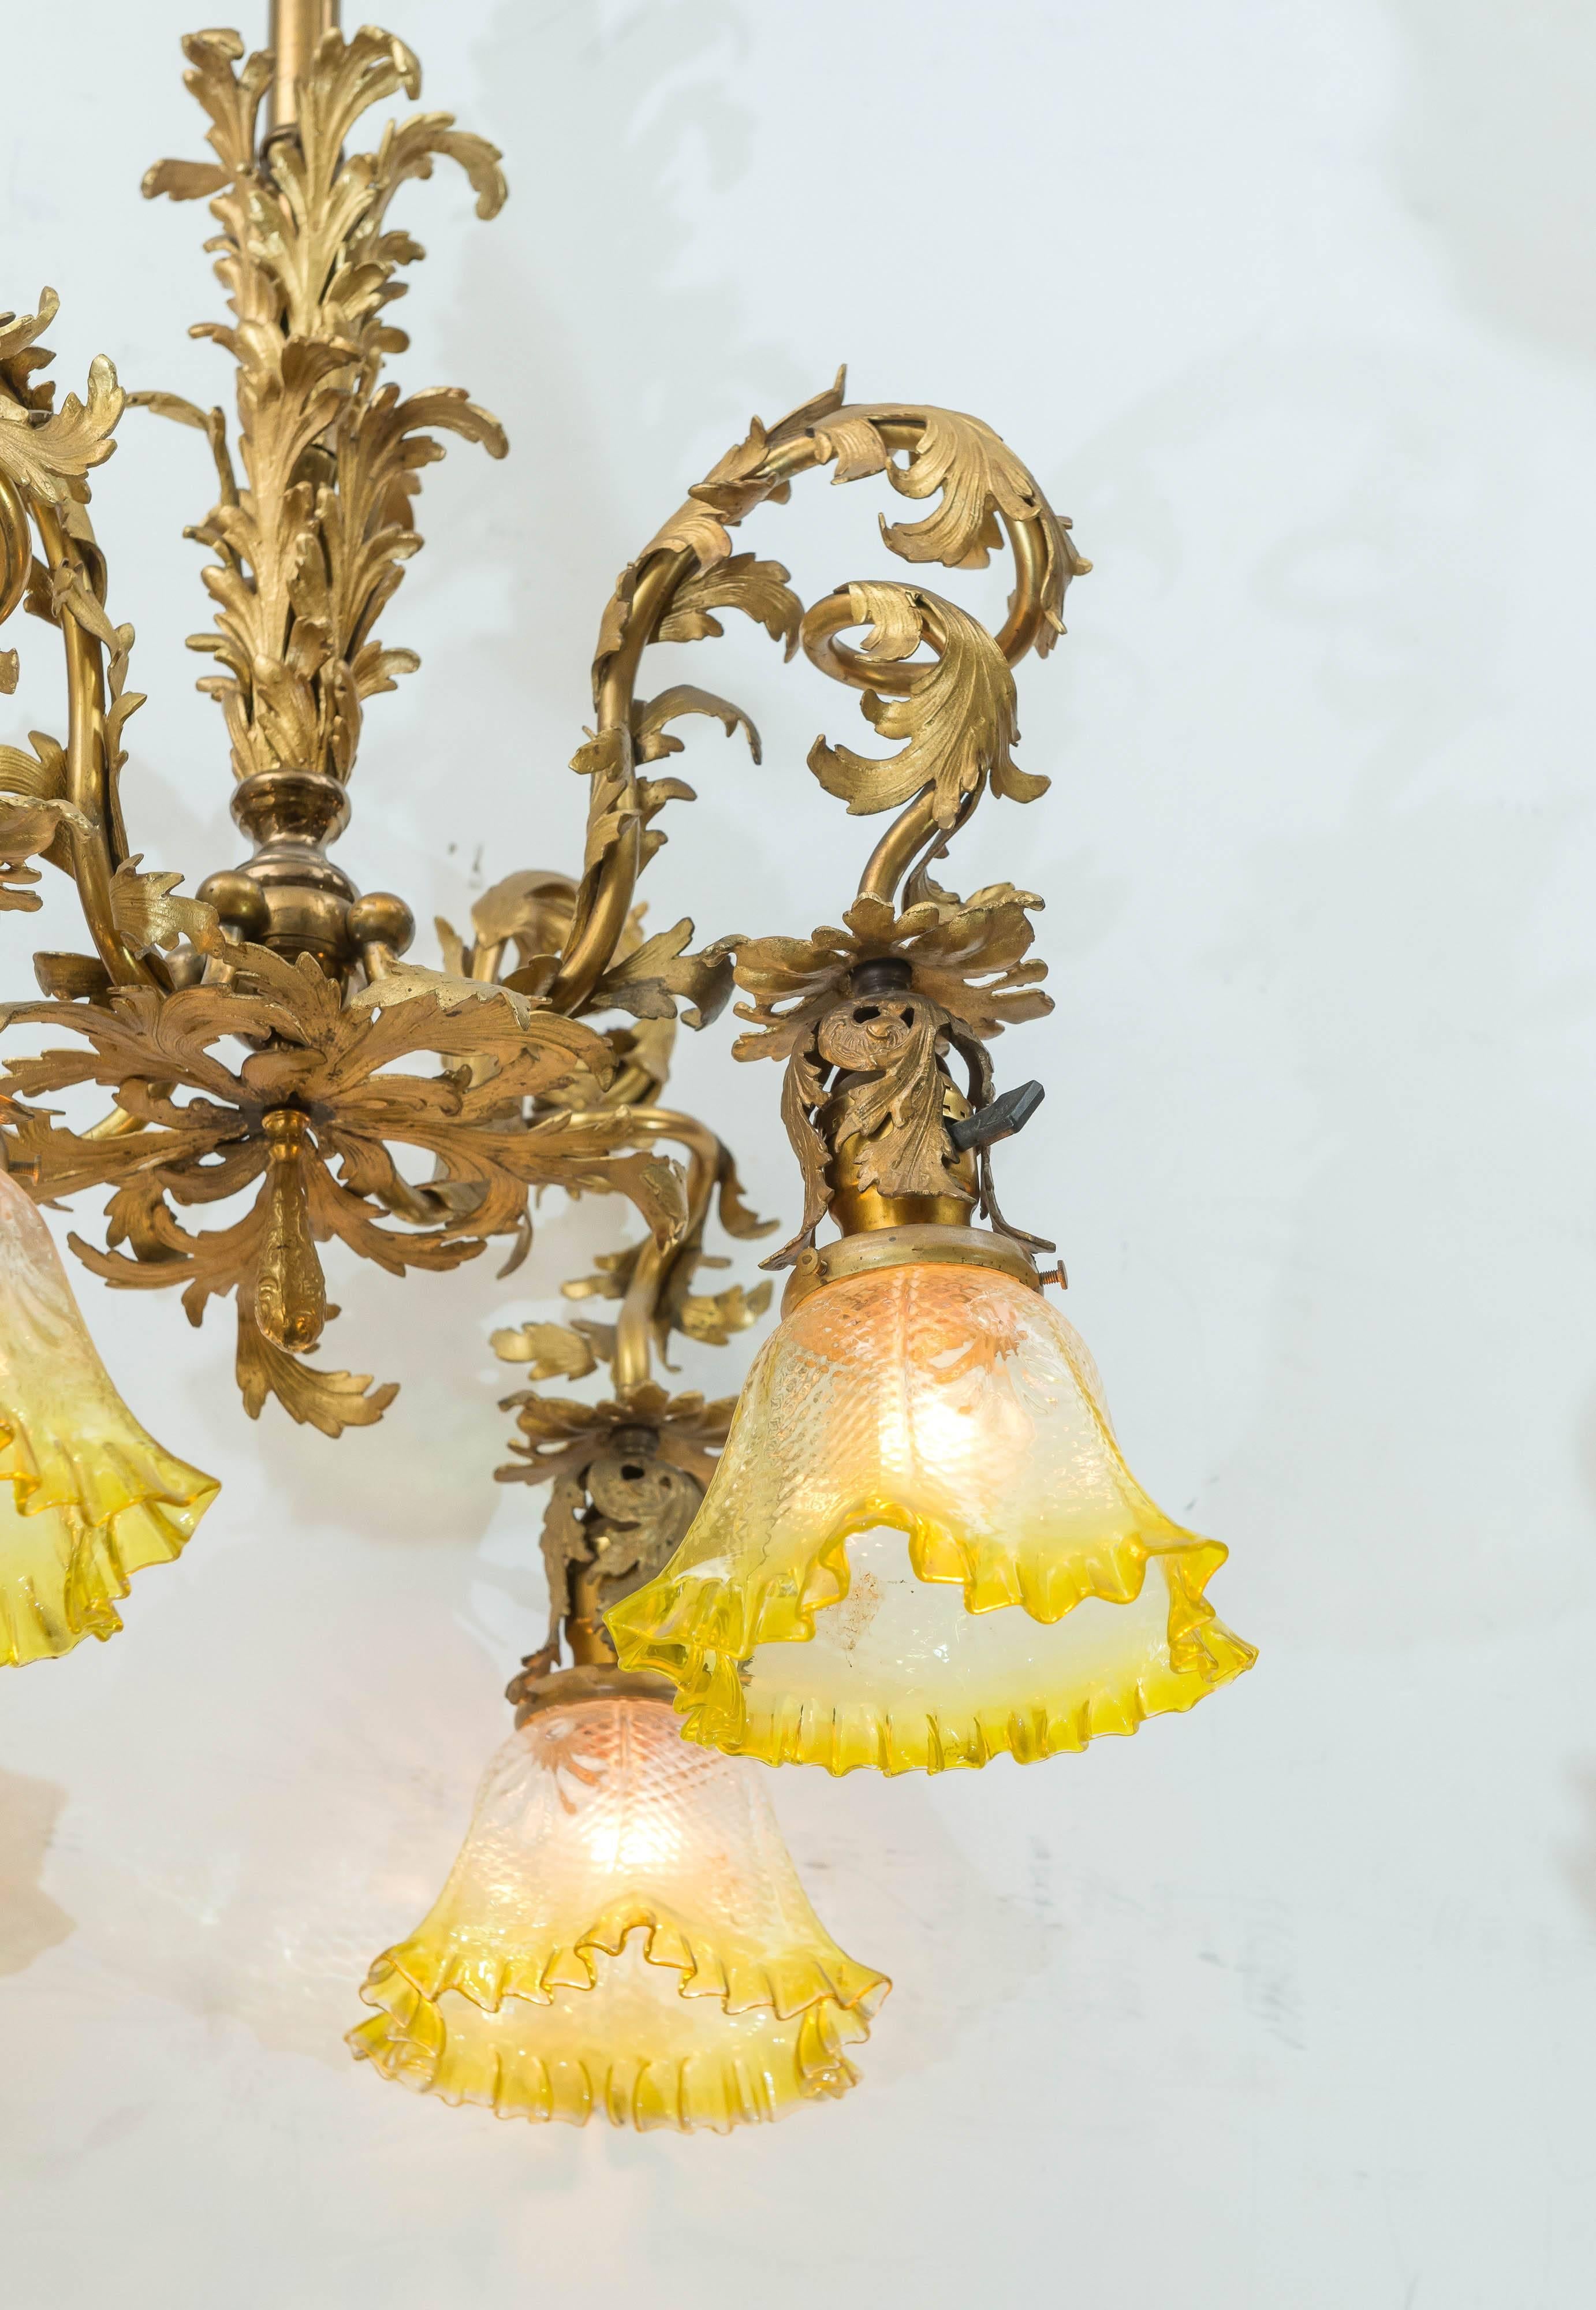 This American chandelier is done in the French taste and maintains it's original gilt finish. The glass shades are period and very unusual with highlighted frilly border. A perfect fit for this chandelier. Check out all the wonderful bronze work on